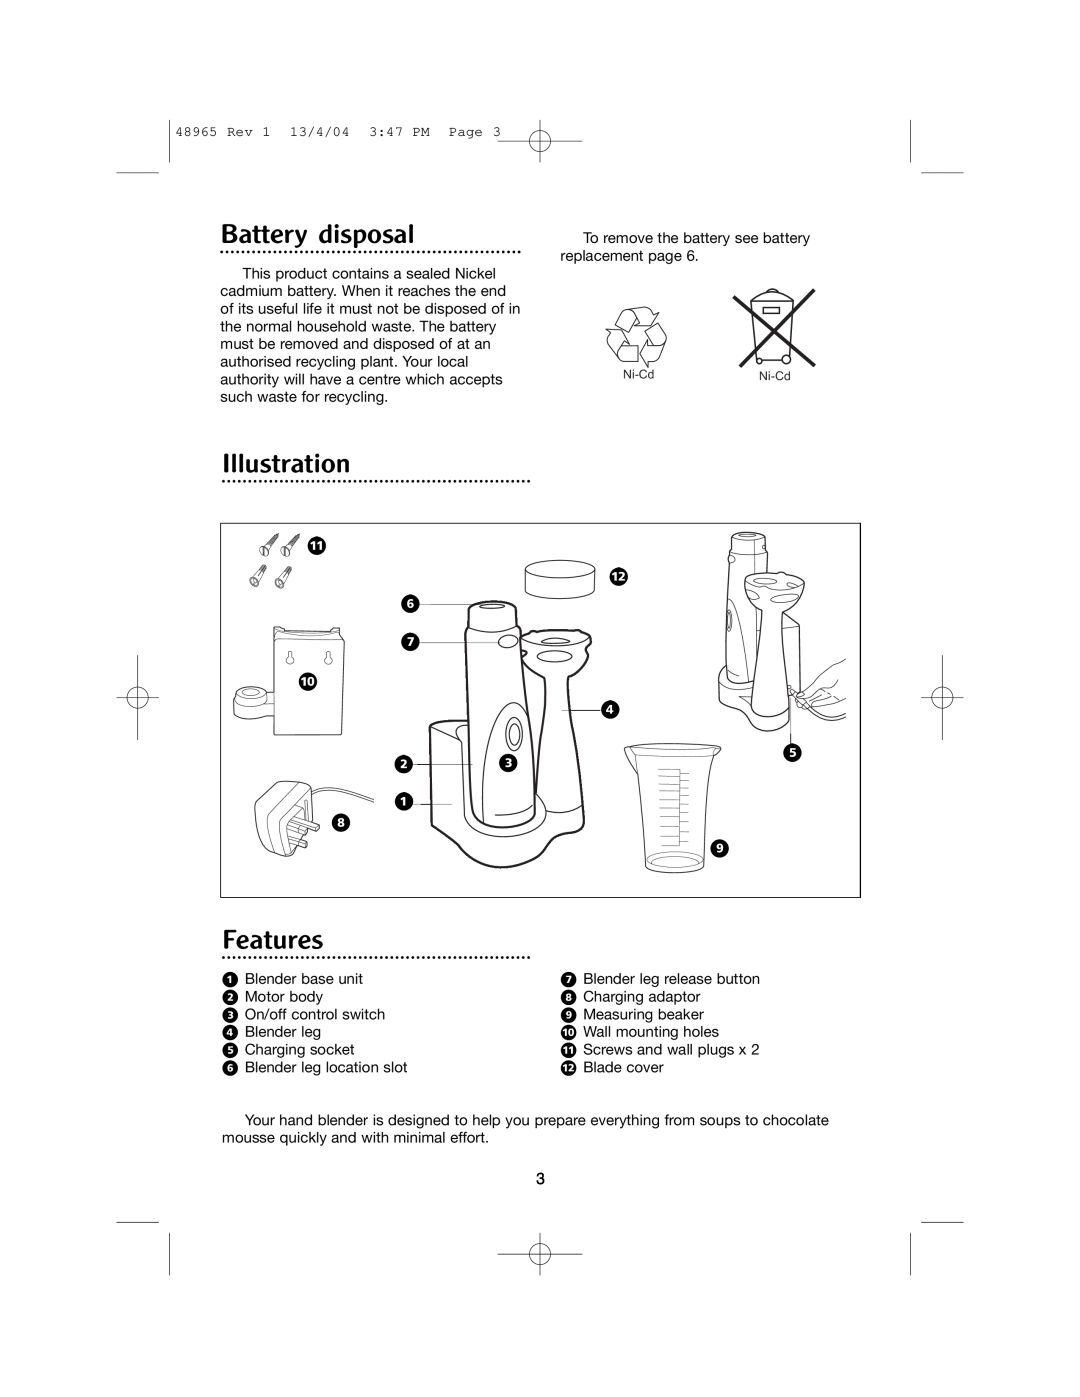 Morphy Richards Cordless hand blender manual Battery disposal, Illustration, Features 